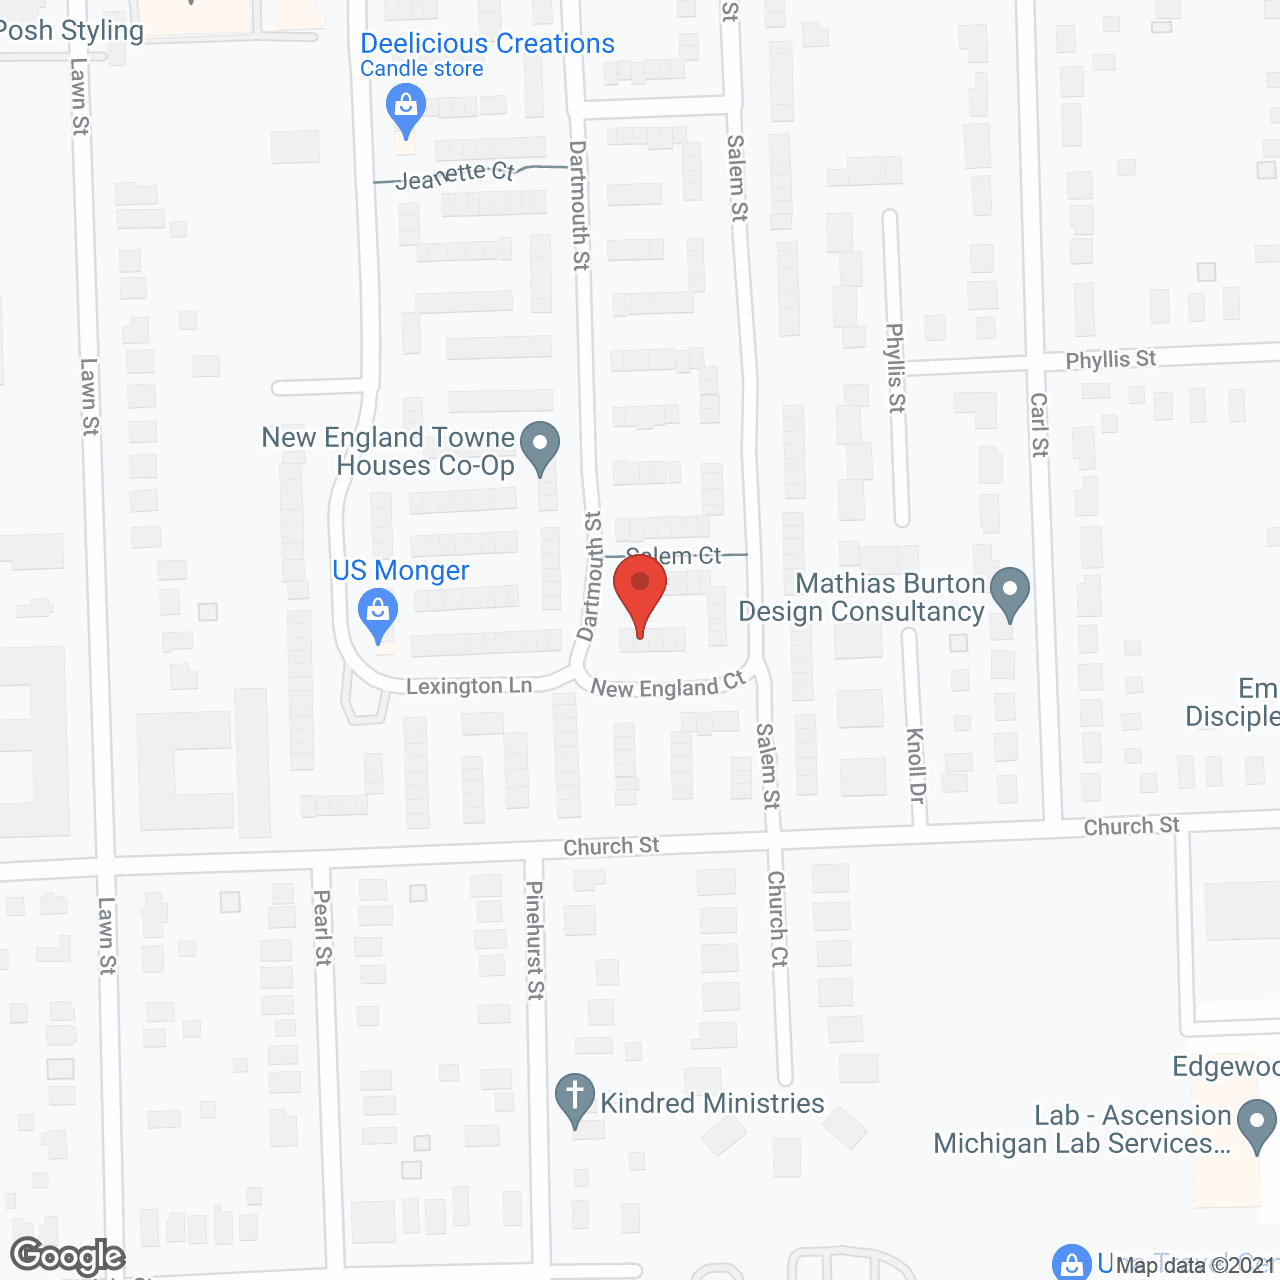 Roseville Townhouses Co-Op in google map